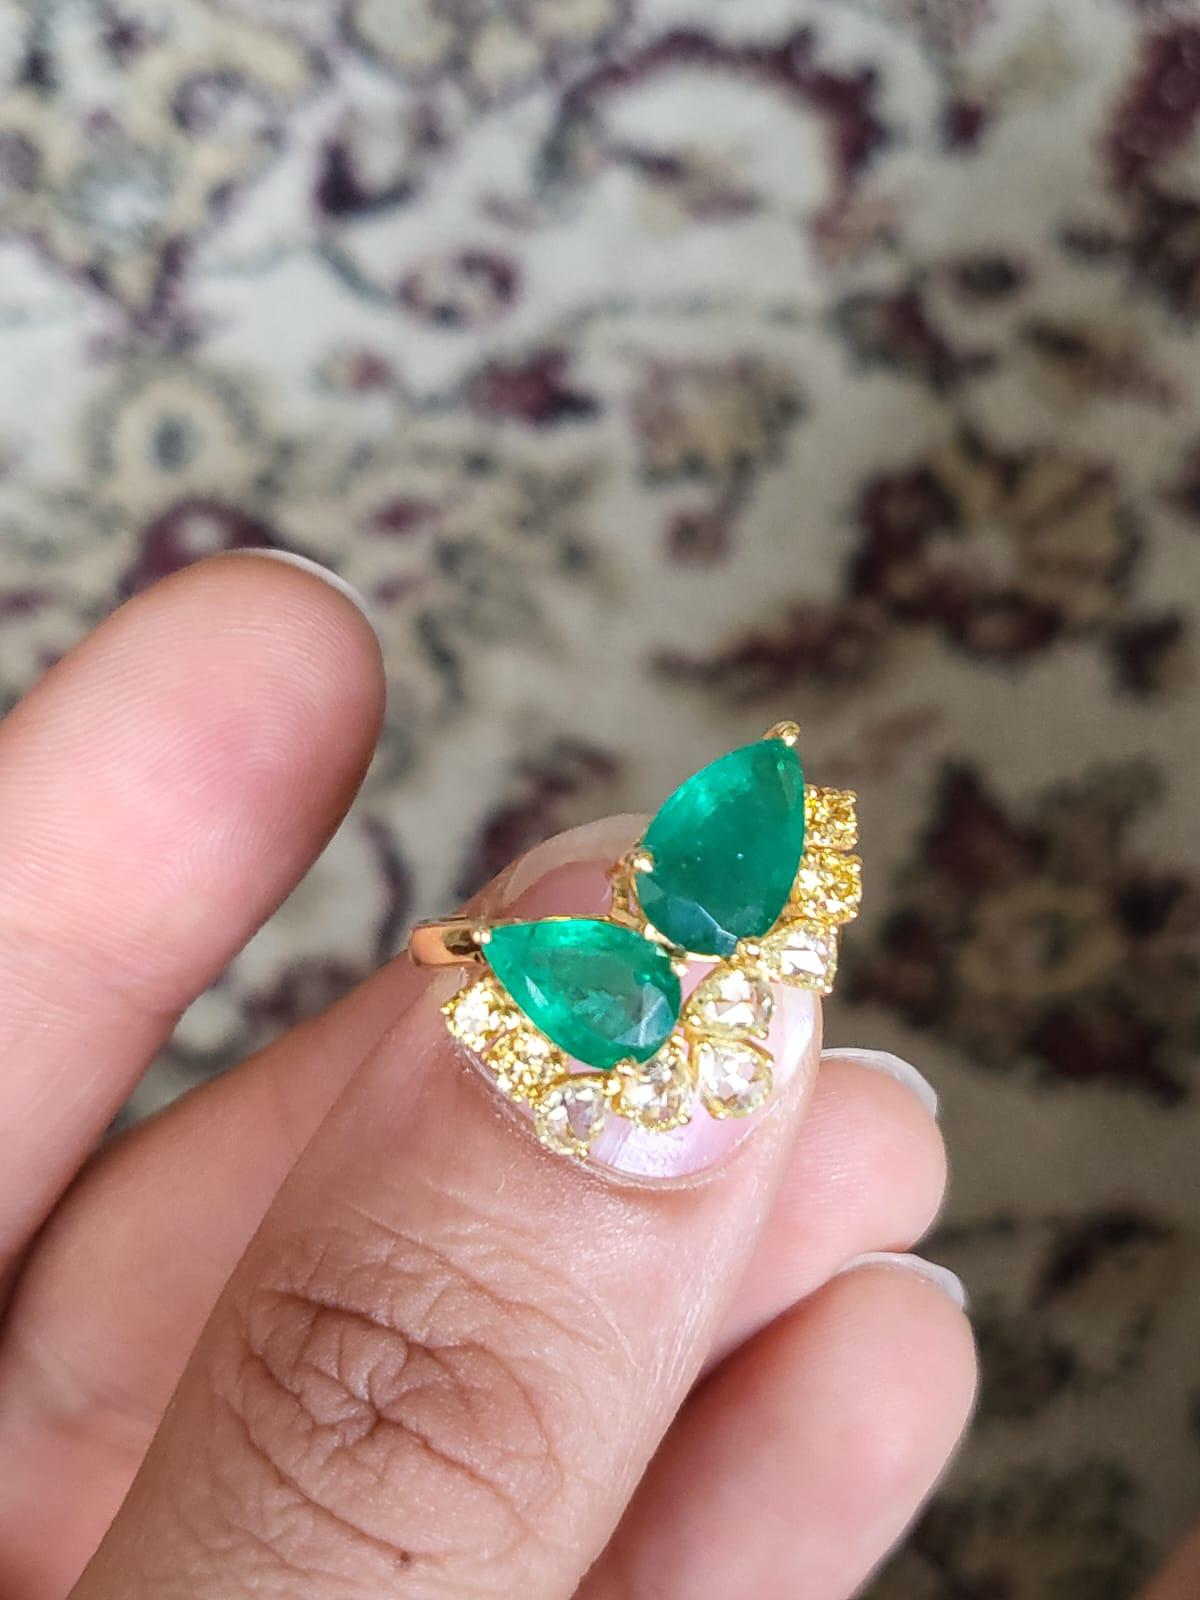 A very gorgeous and one of a kind, Emerald Engagement Ring set in 18K Yellow Gold & Diamonds. The weight of the pear shaped Emeralds is 2.65 carats. The Emeralds are completely natural, without any treatment and is of Zambian origin. The weight of